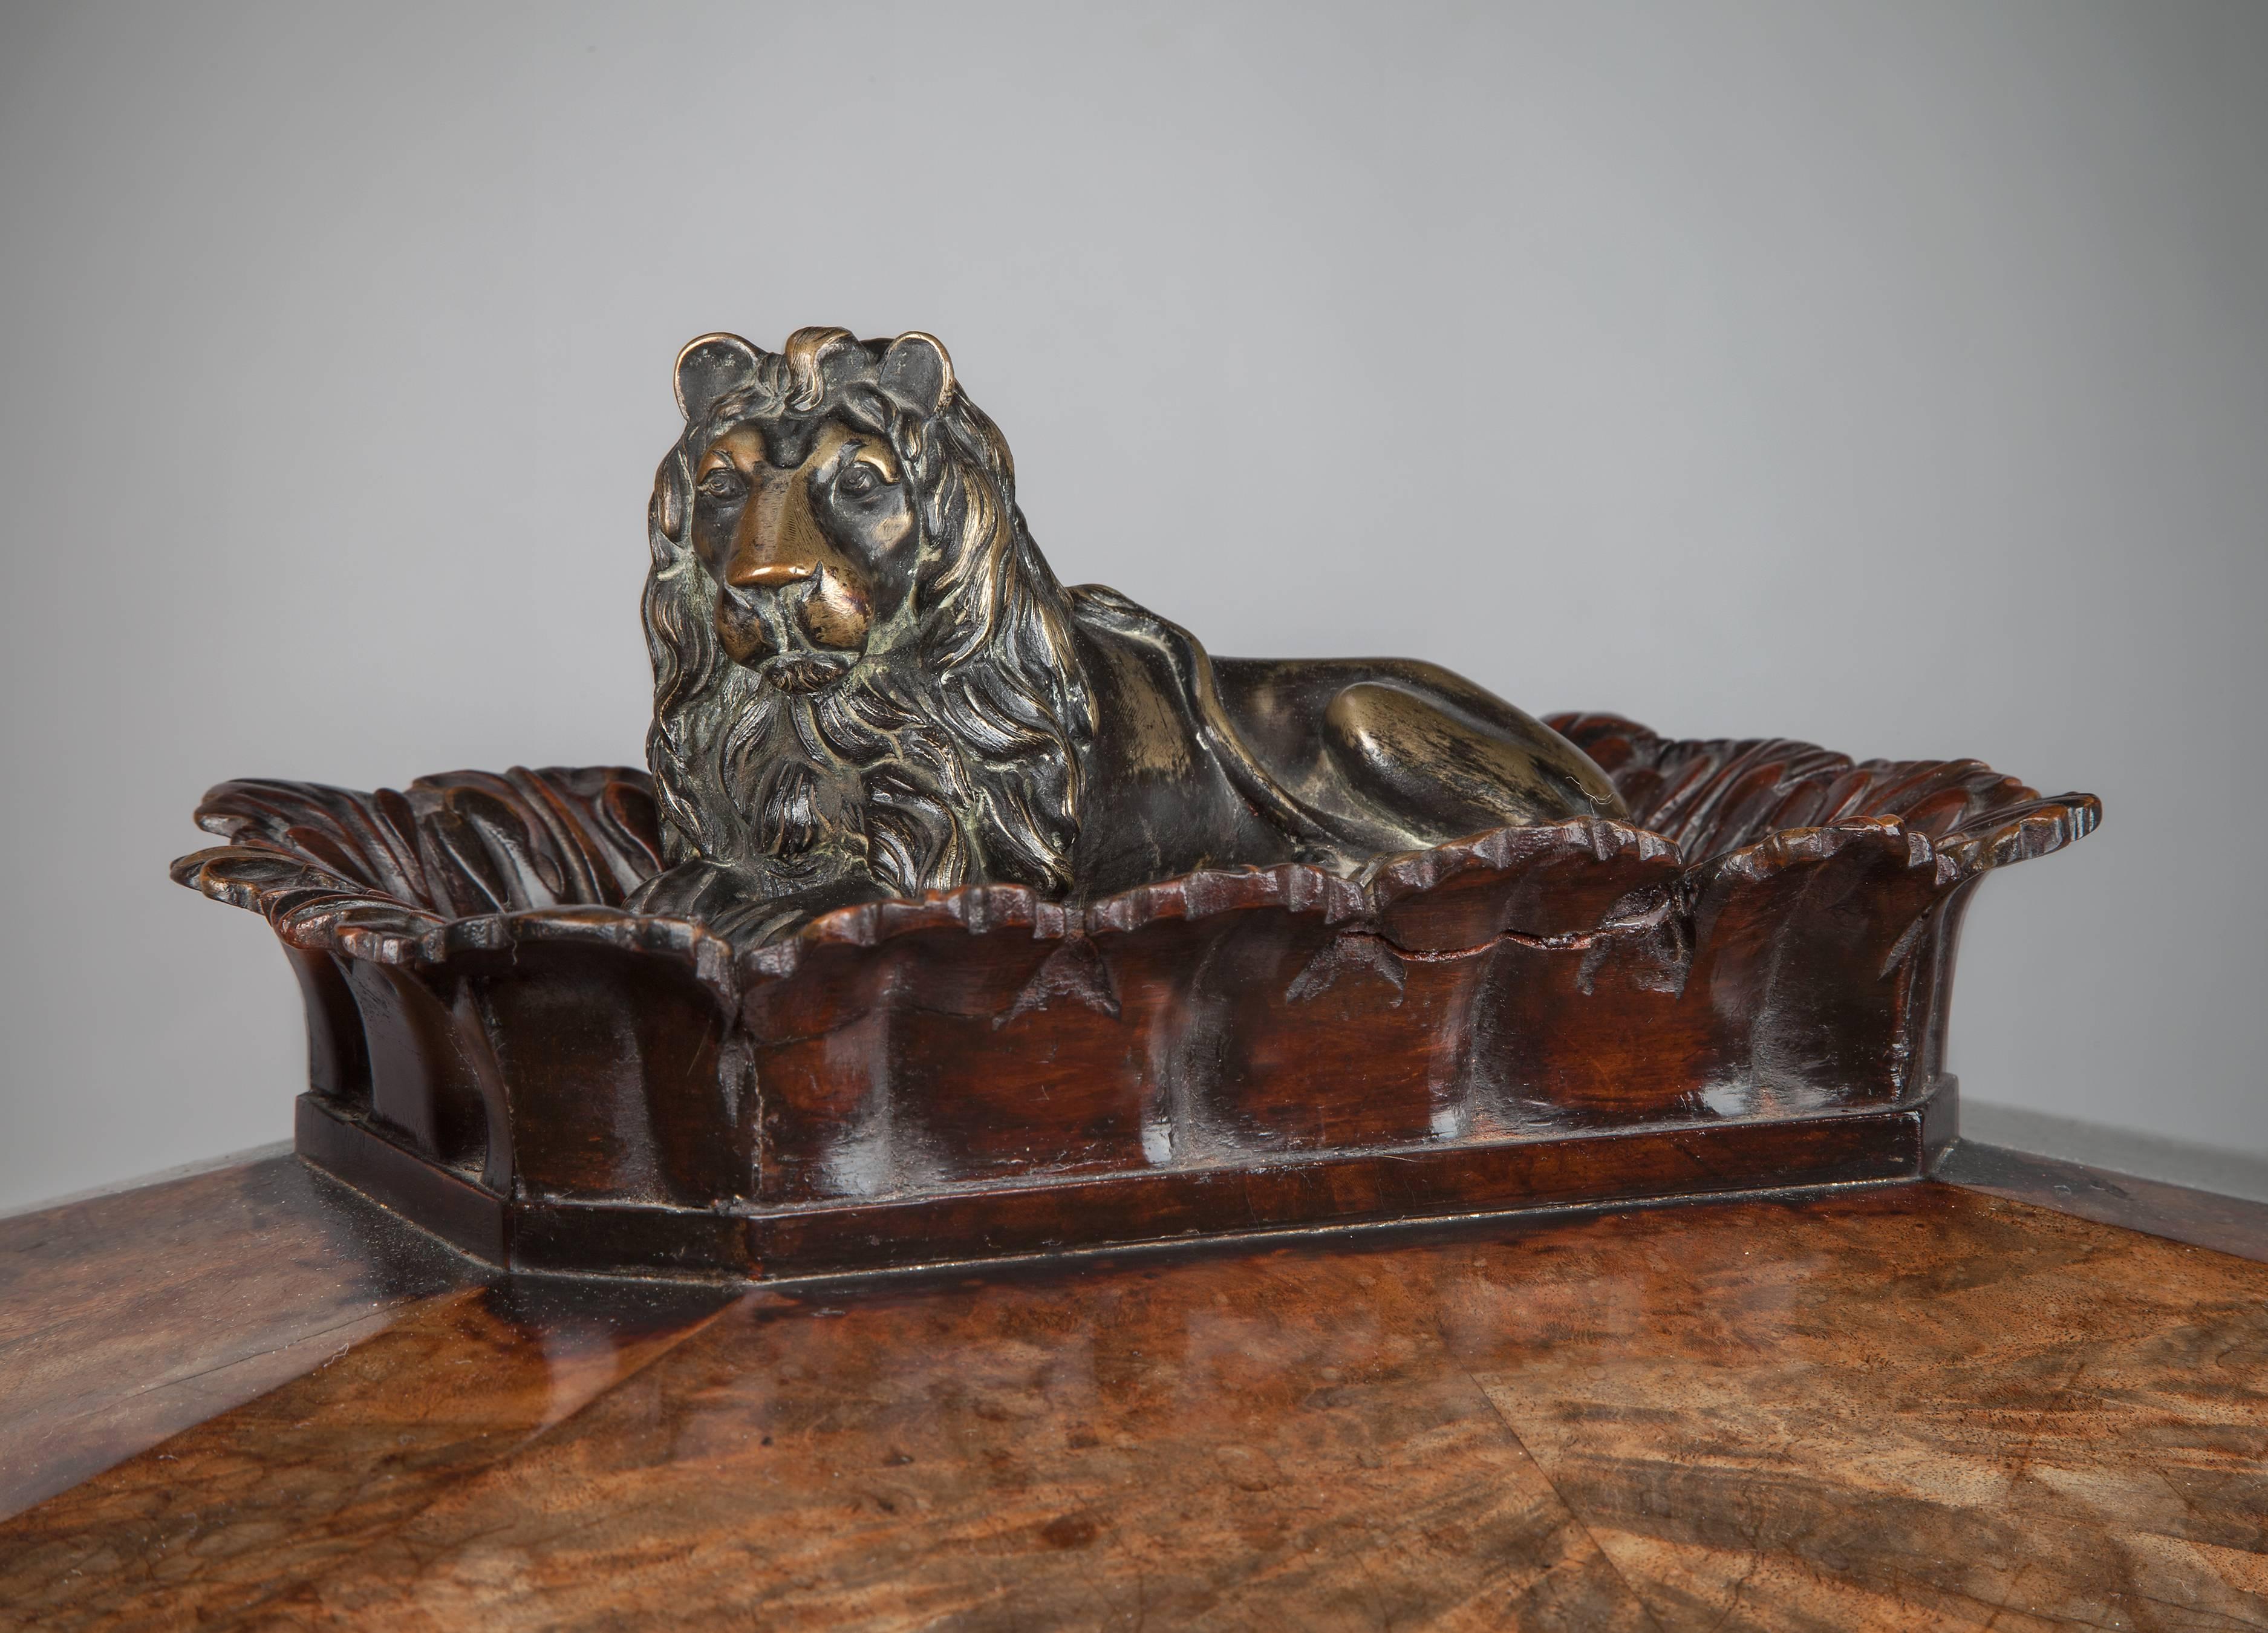 An early 19th century Regency mahogany sarcophagus wine cooler, the pitched lid adorned with a recumbent bronze lion framed with acanthus leaves, above a panelled base with re-entrant mouldings. The frieze decorated with circular bronze paterae